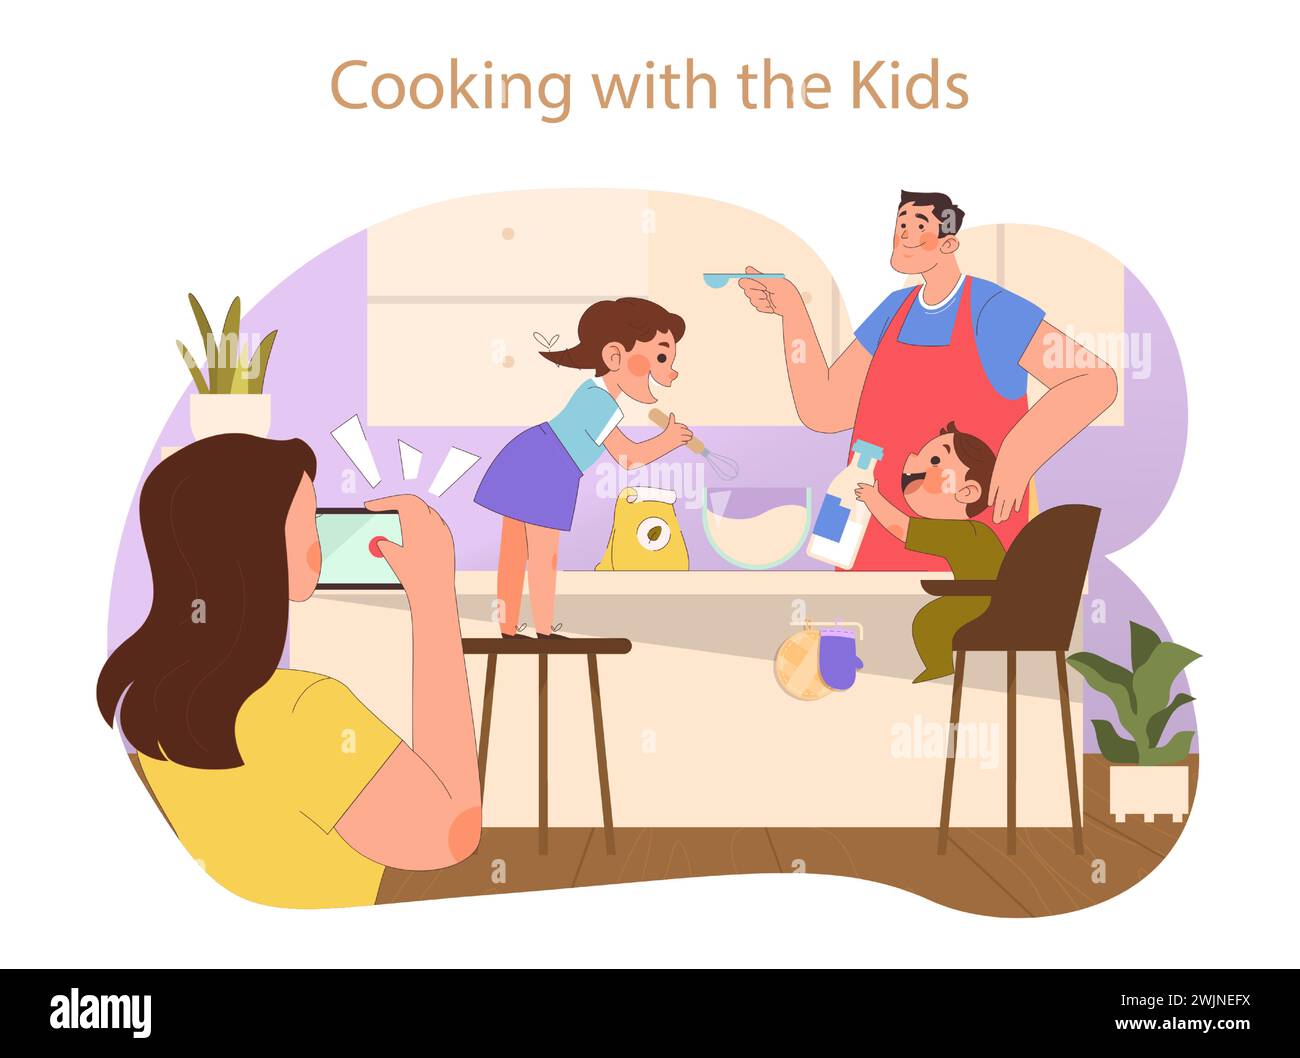 Family Hobbies concept. A heartwarming culinary session where kids and parents share the joy of cooking in a home kitchen. Stock Vector